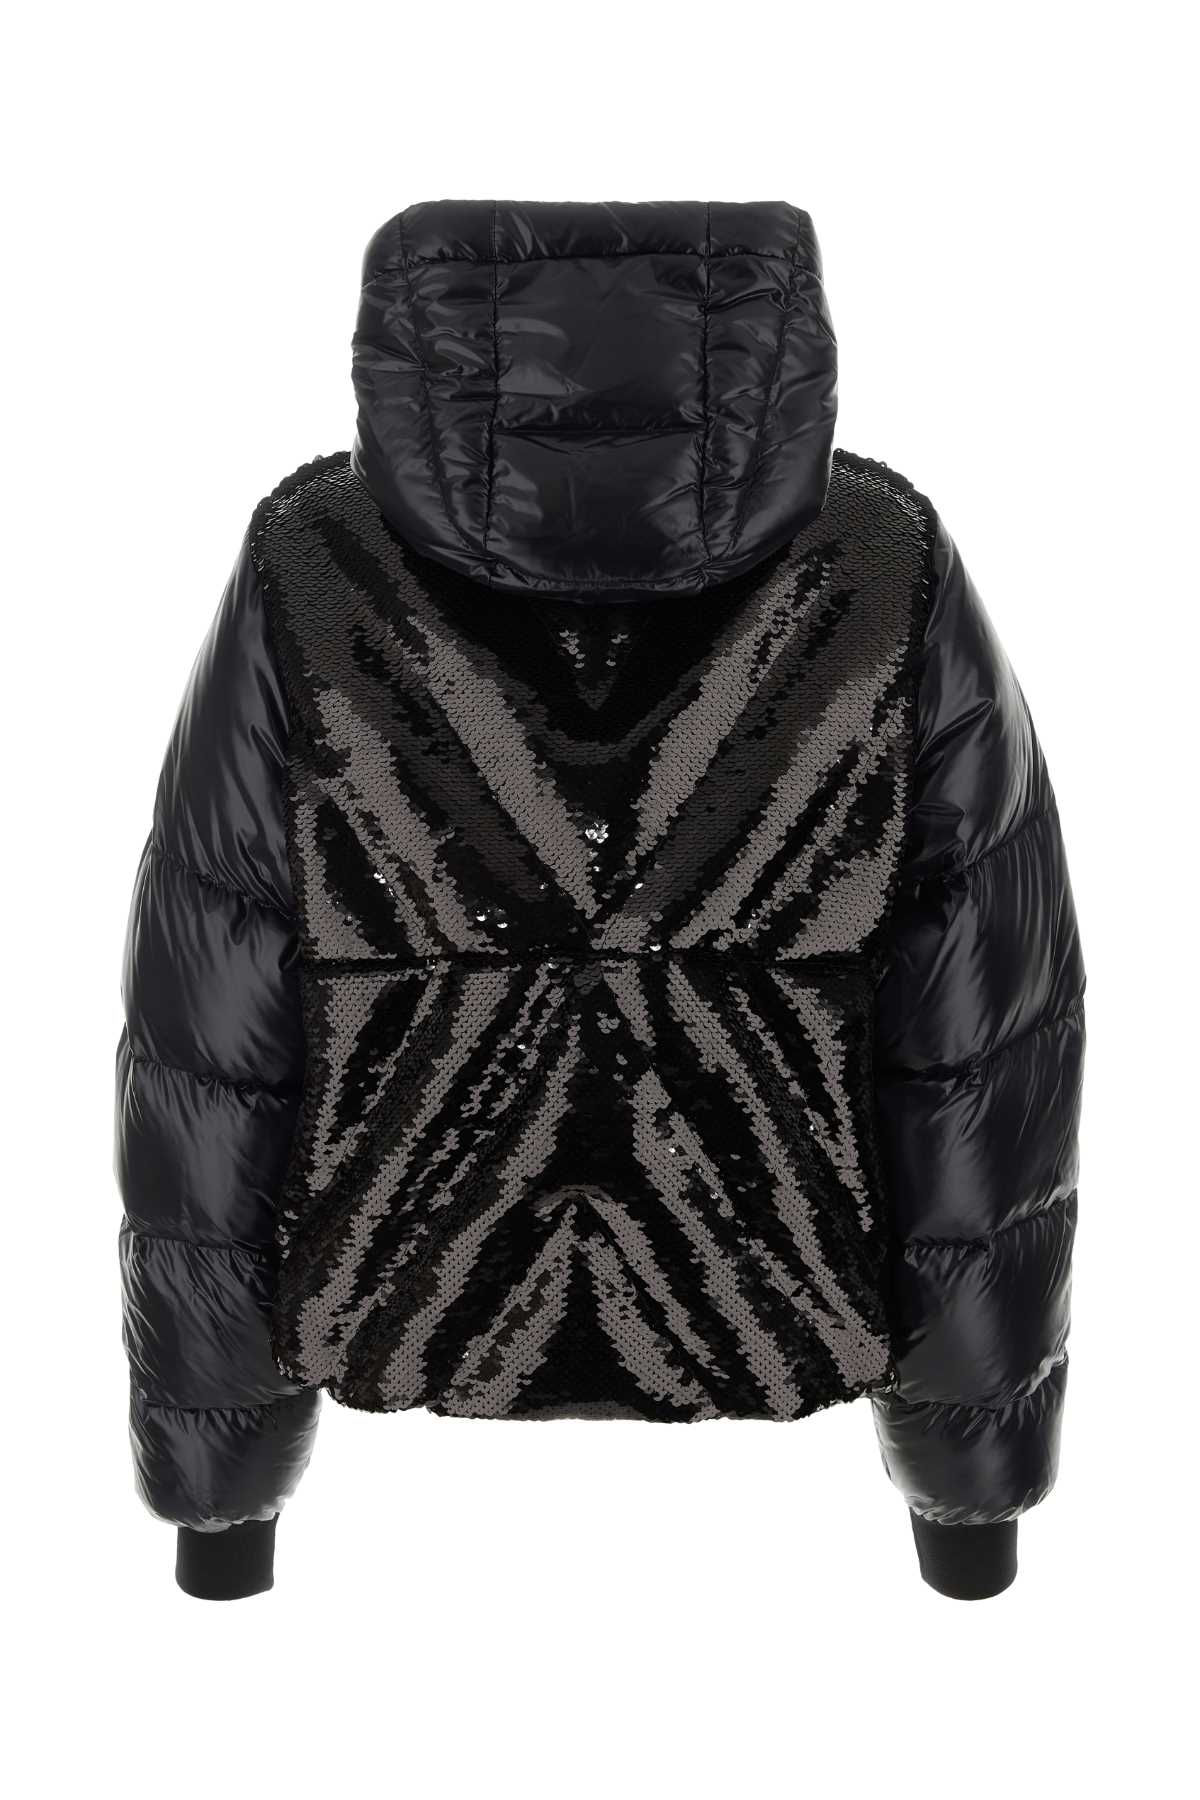 Shop Khrisjoy Black Sequins And Nylon Puff Glossy Down Jacket